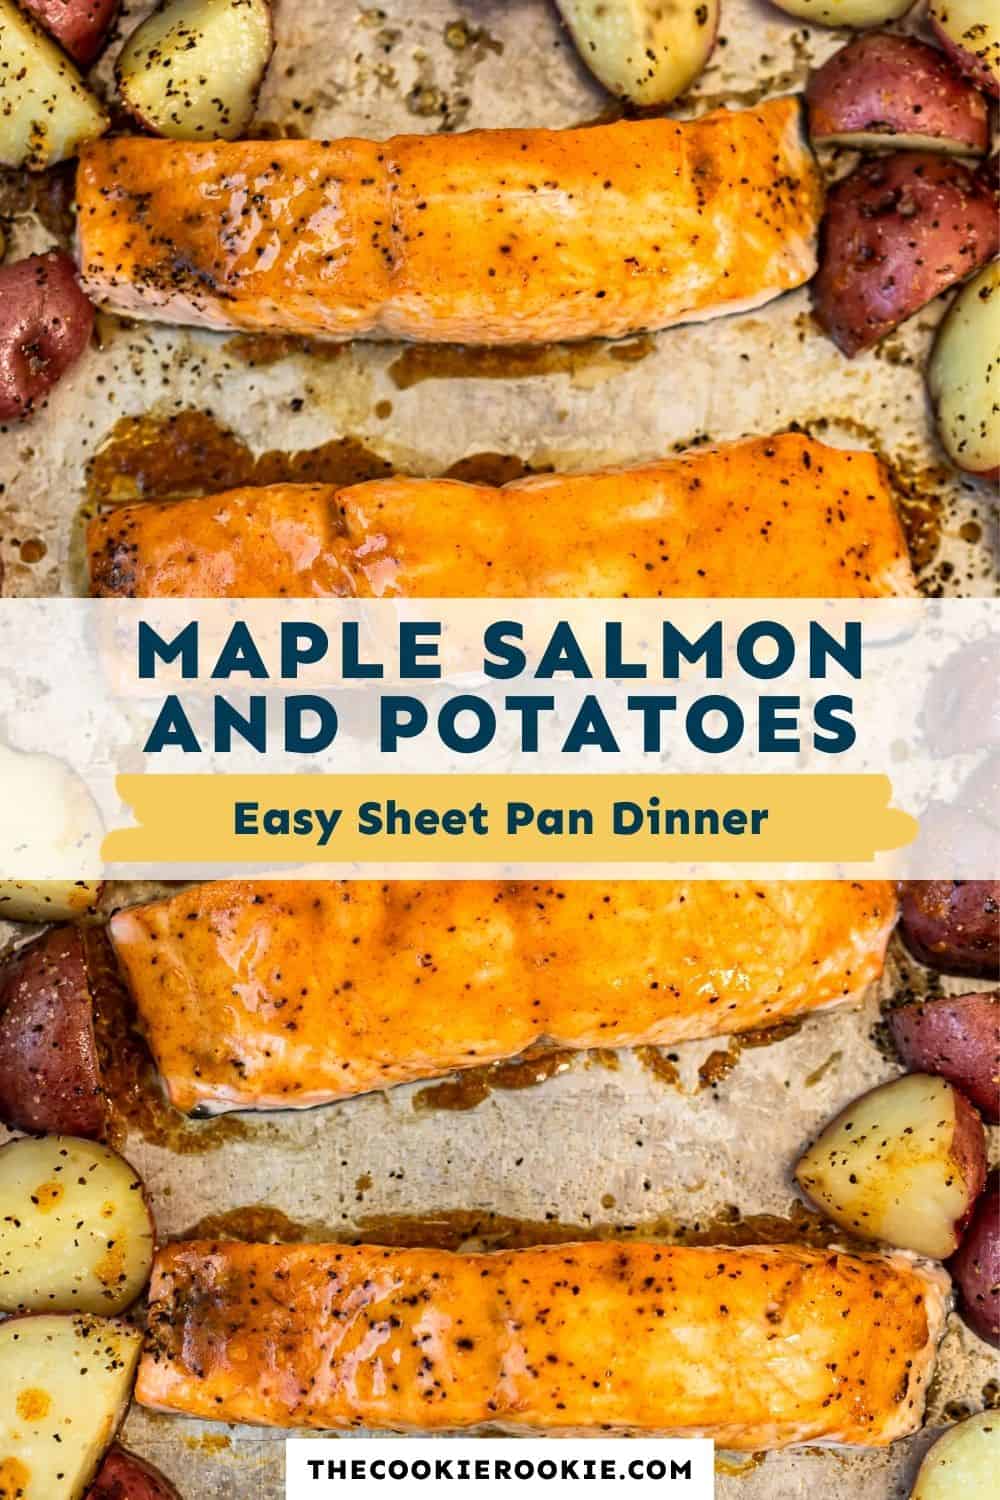 Maple Glazed Salmon and Potatoes Recipe - The Cookie Rookie®